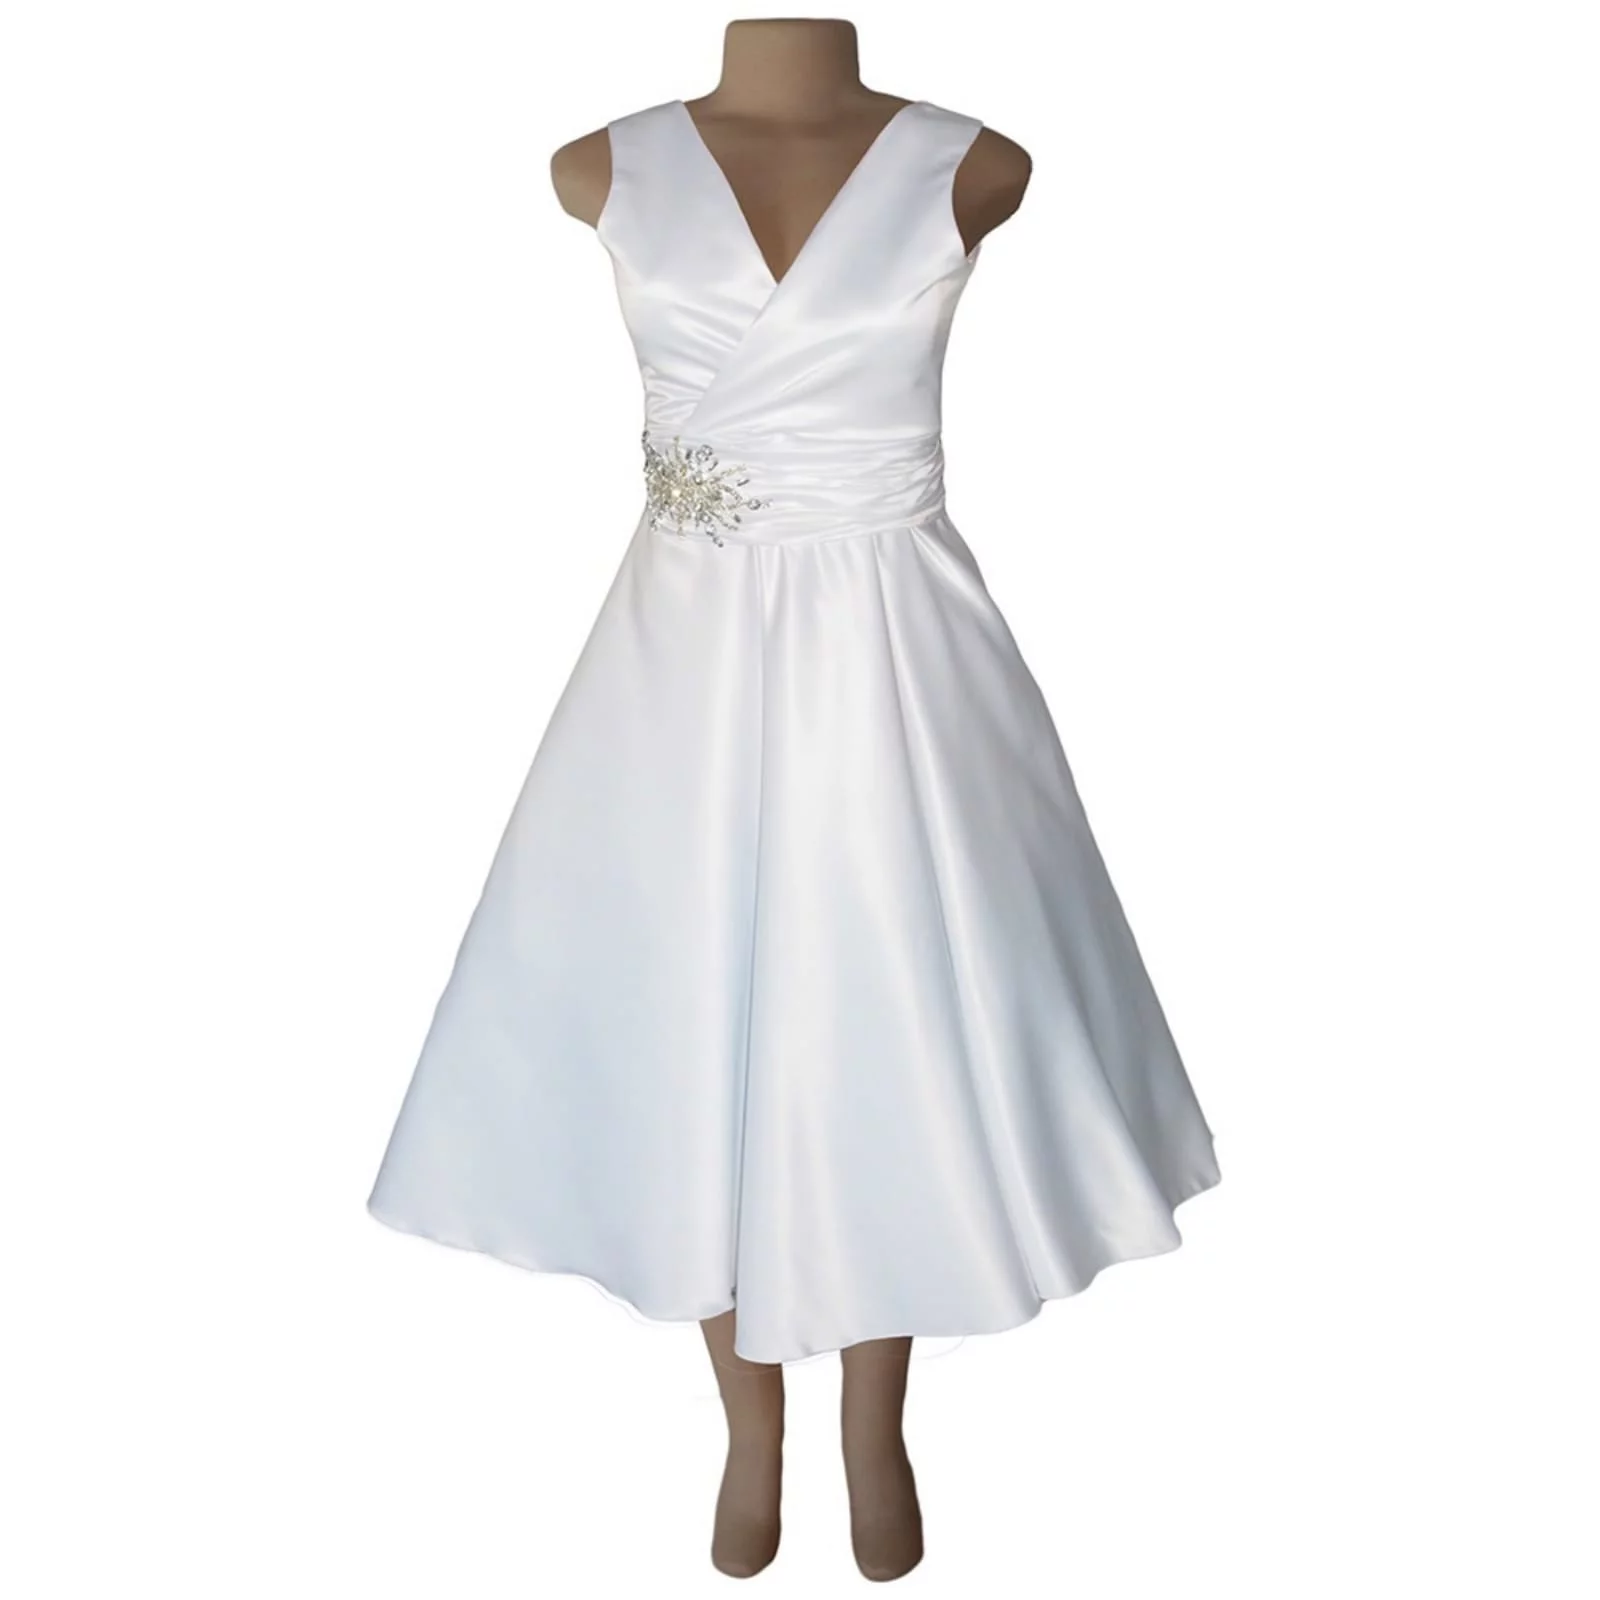 White satin 3/4 length v neck custom made wedding dress 4 white satin 3/4 length v neck custom made wedding dress, with a cross bust effect, with a ruched belt detailed with silver bling. Back detailed with buttons. With a 3/4 sleeve rounded white bolero.